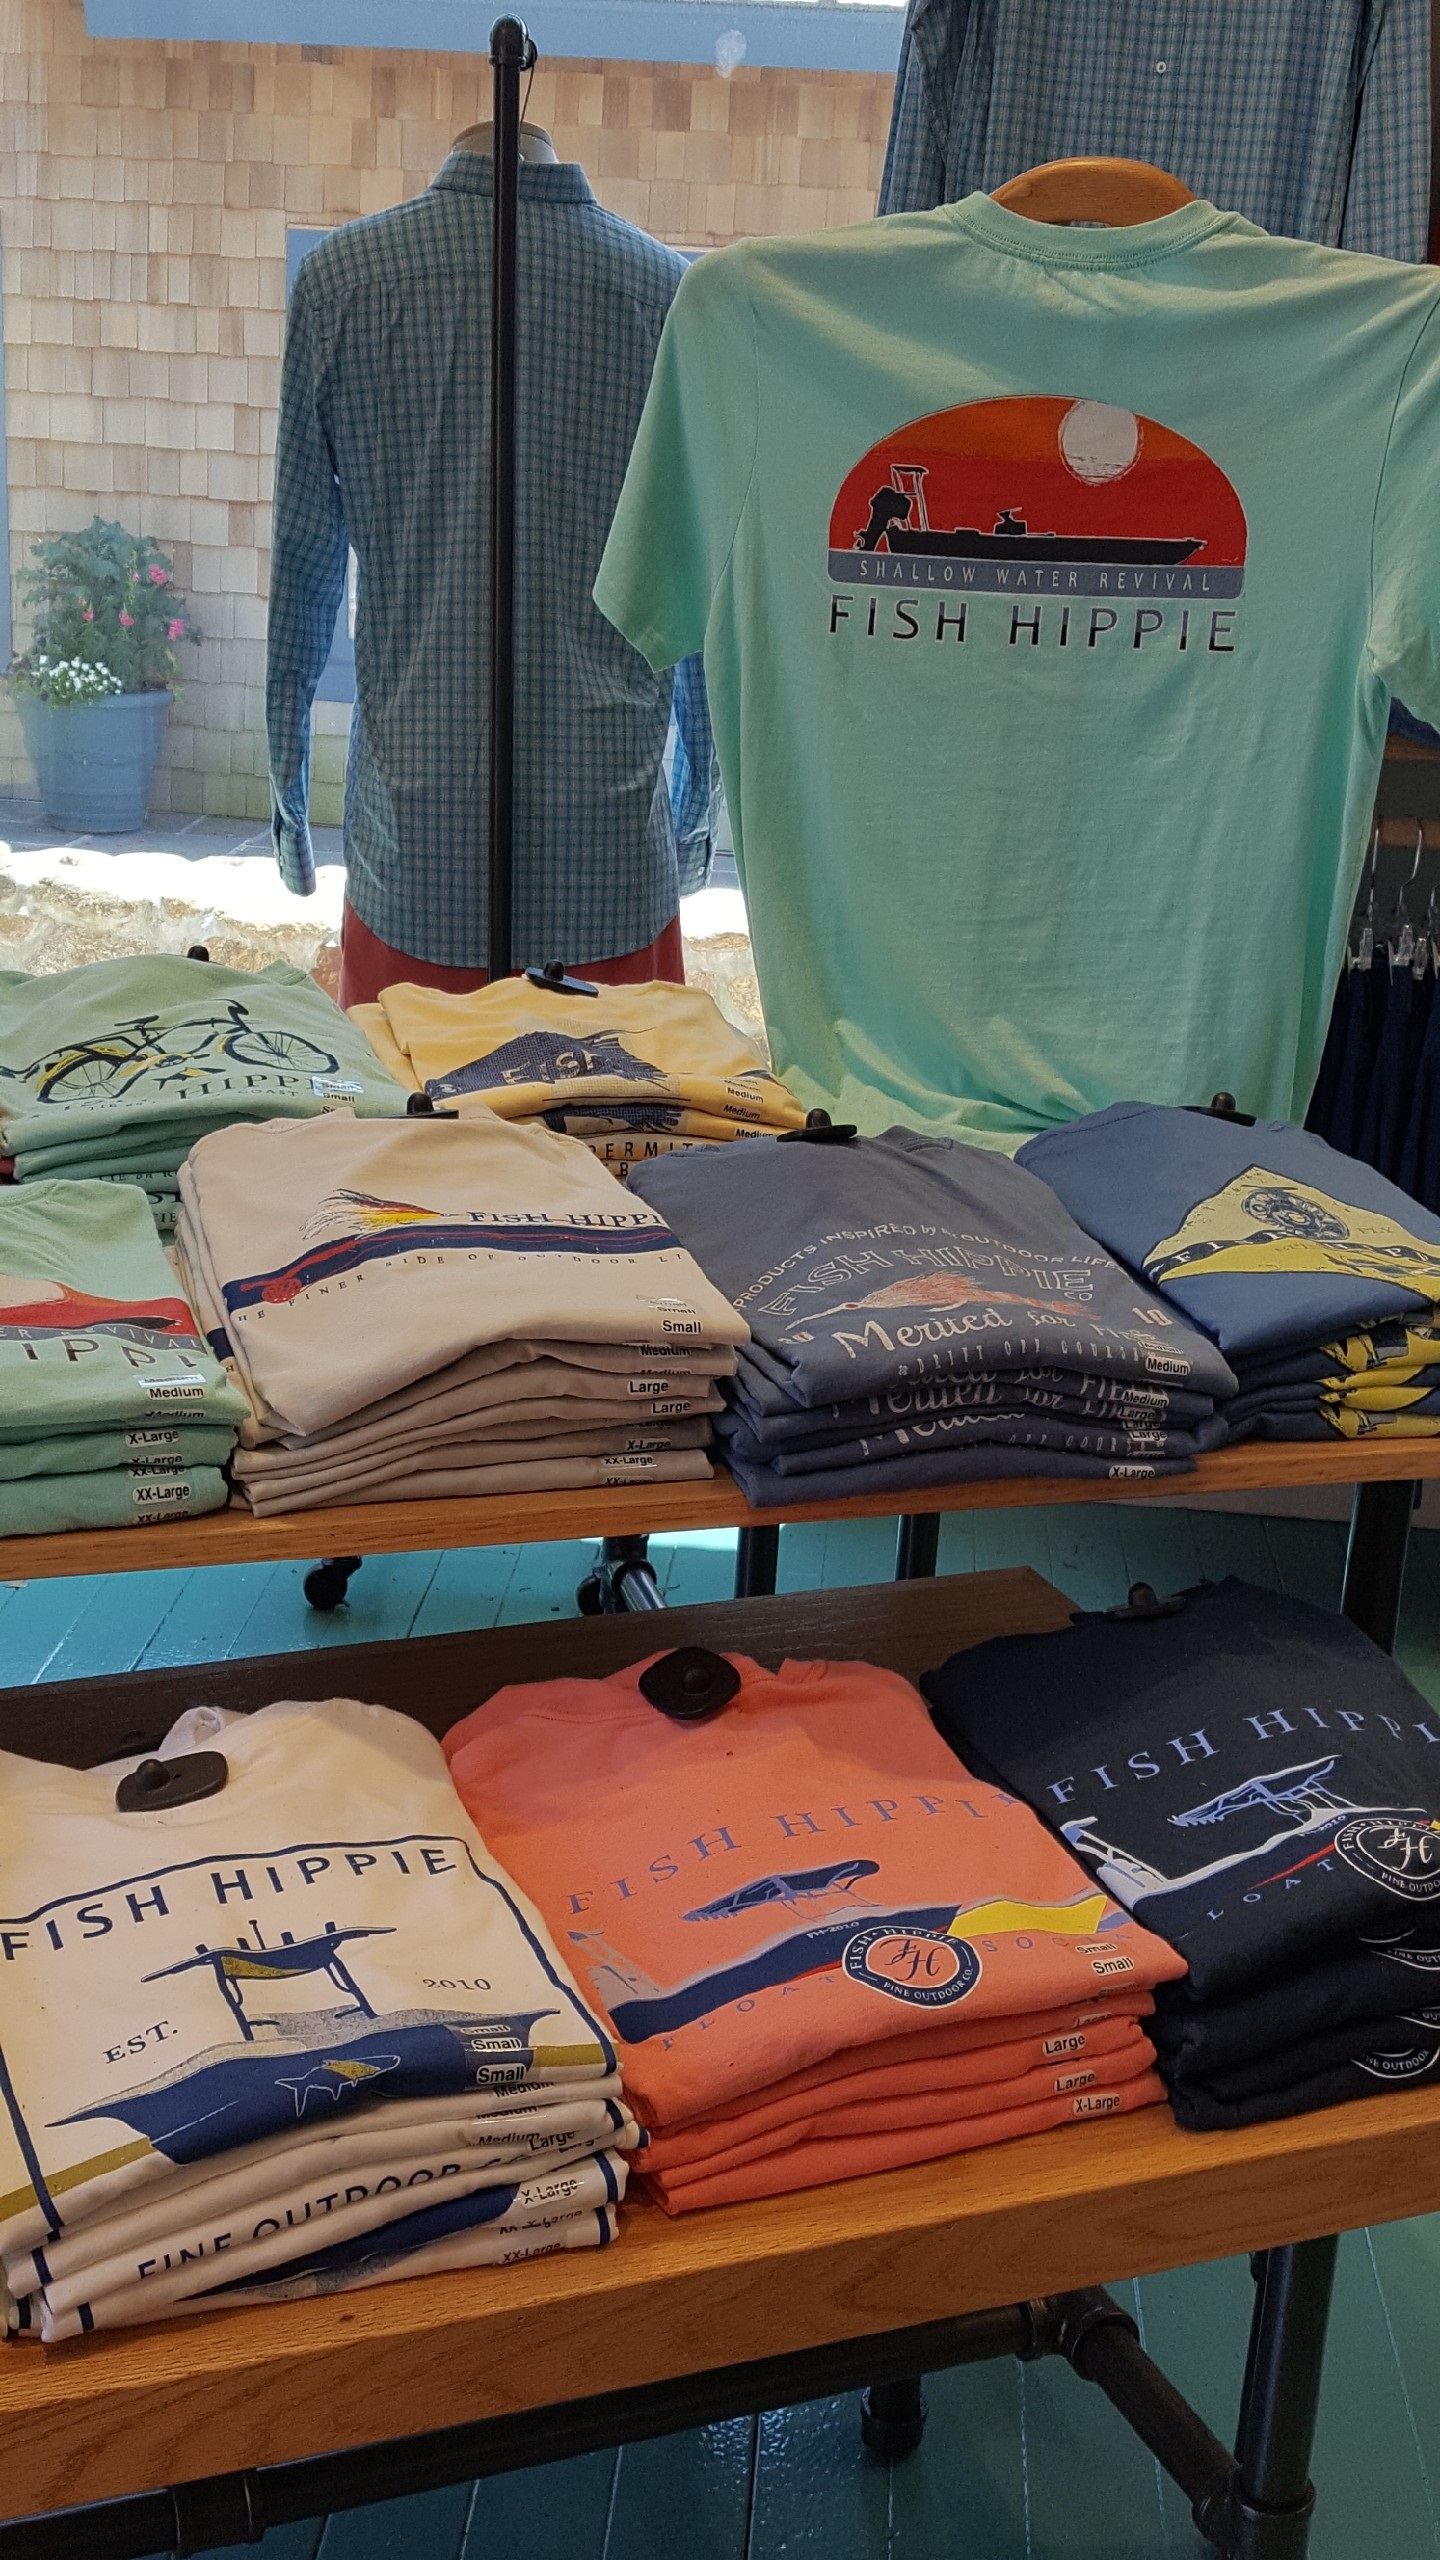 Whether You're A Fisherman Or Just A Fish Hippie, You'll Be Hooked